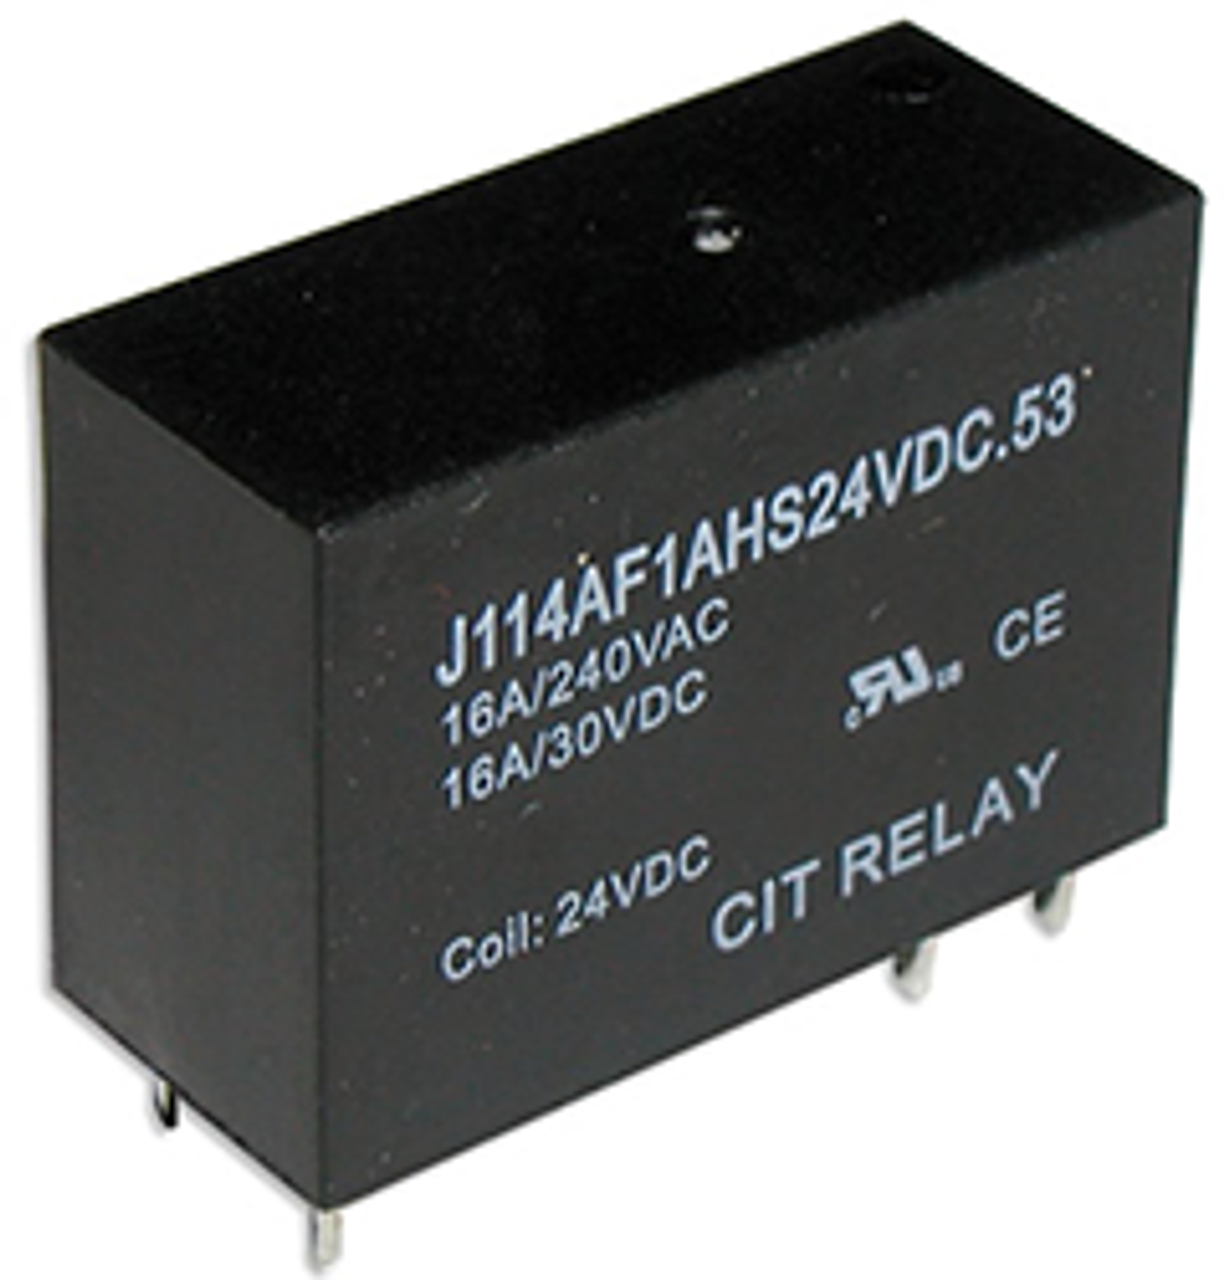 CIT Relay and Switch J114AF1CHS3VDC.53 Power Relays